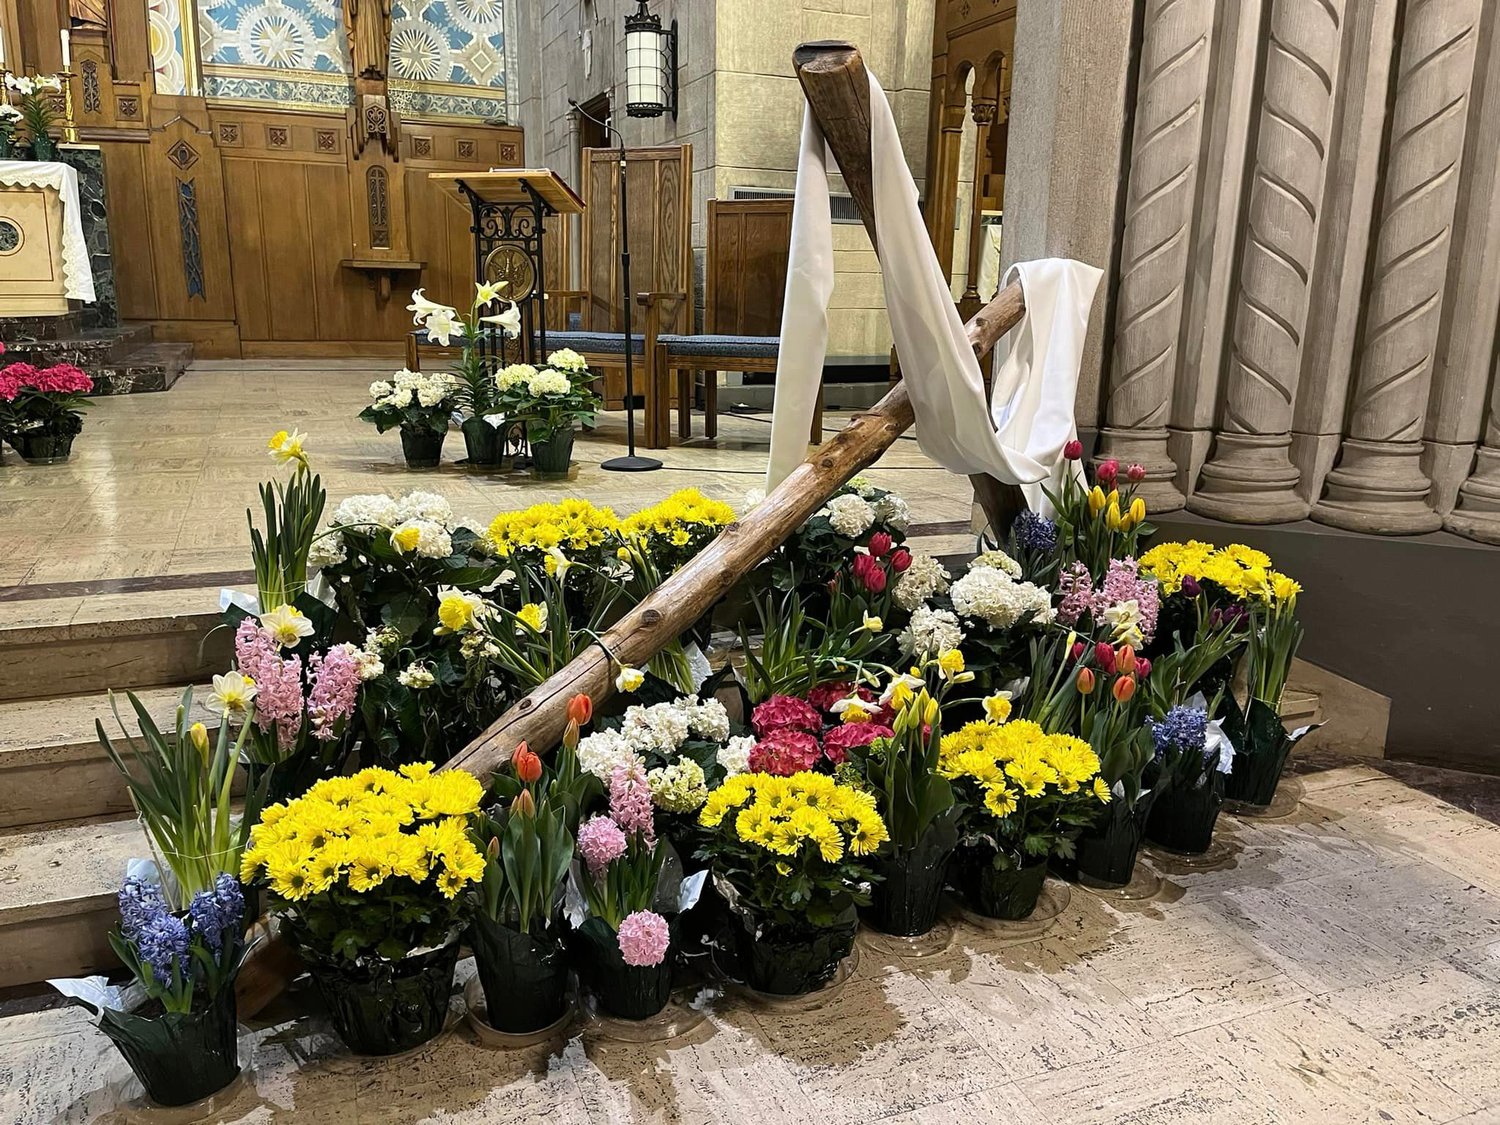 EASTER SUNDAY: Rhode Island’s Catholic churches are filled with flowers and faithful on Easter morning. Pictured: St. John Paul II Church, Pawtucket.